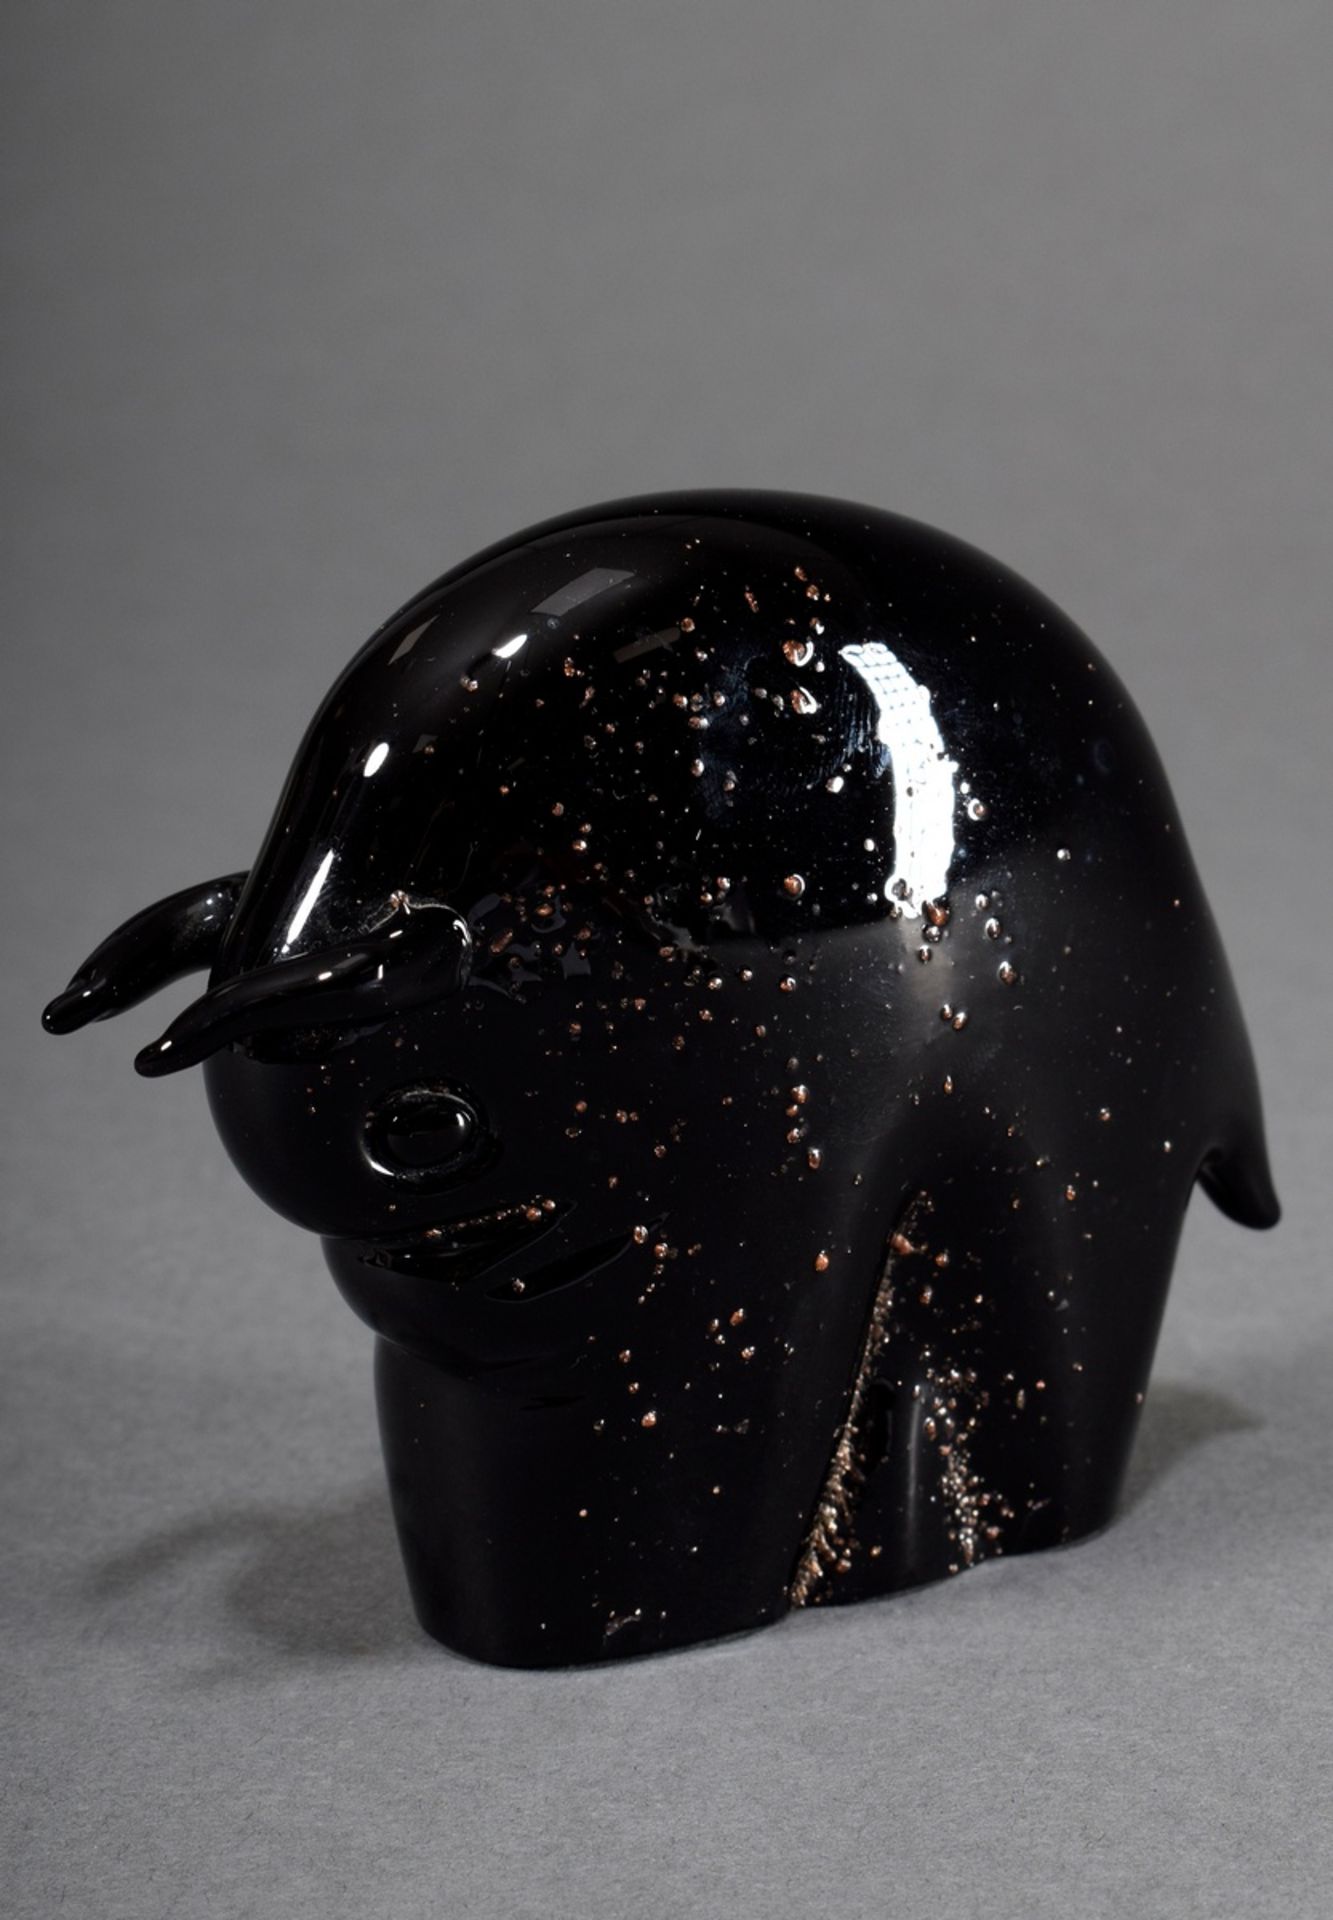 Murano glass "bull" with gold crumb melting, black glass, freely formed, pulled with tongs, probabl